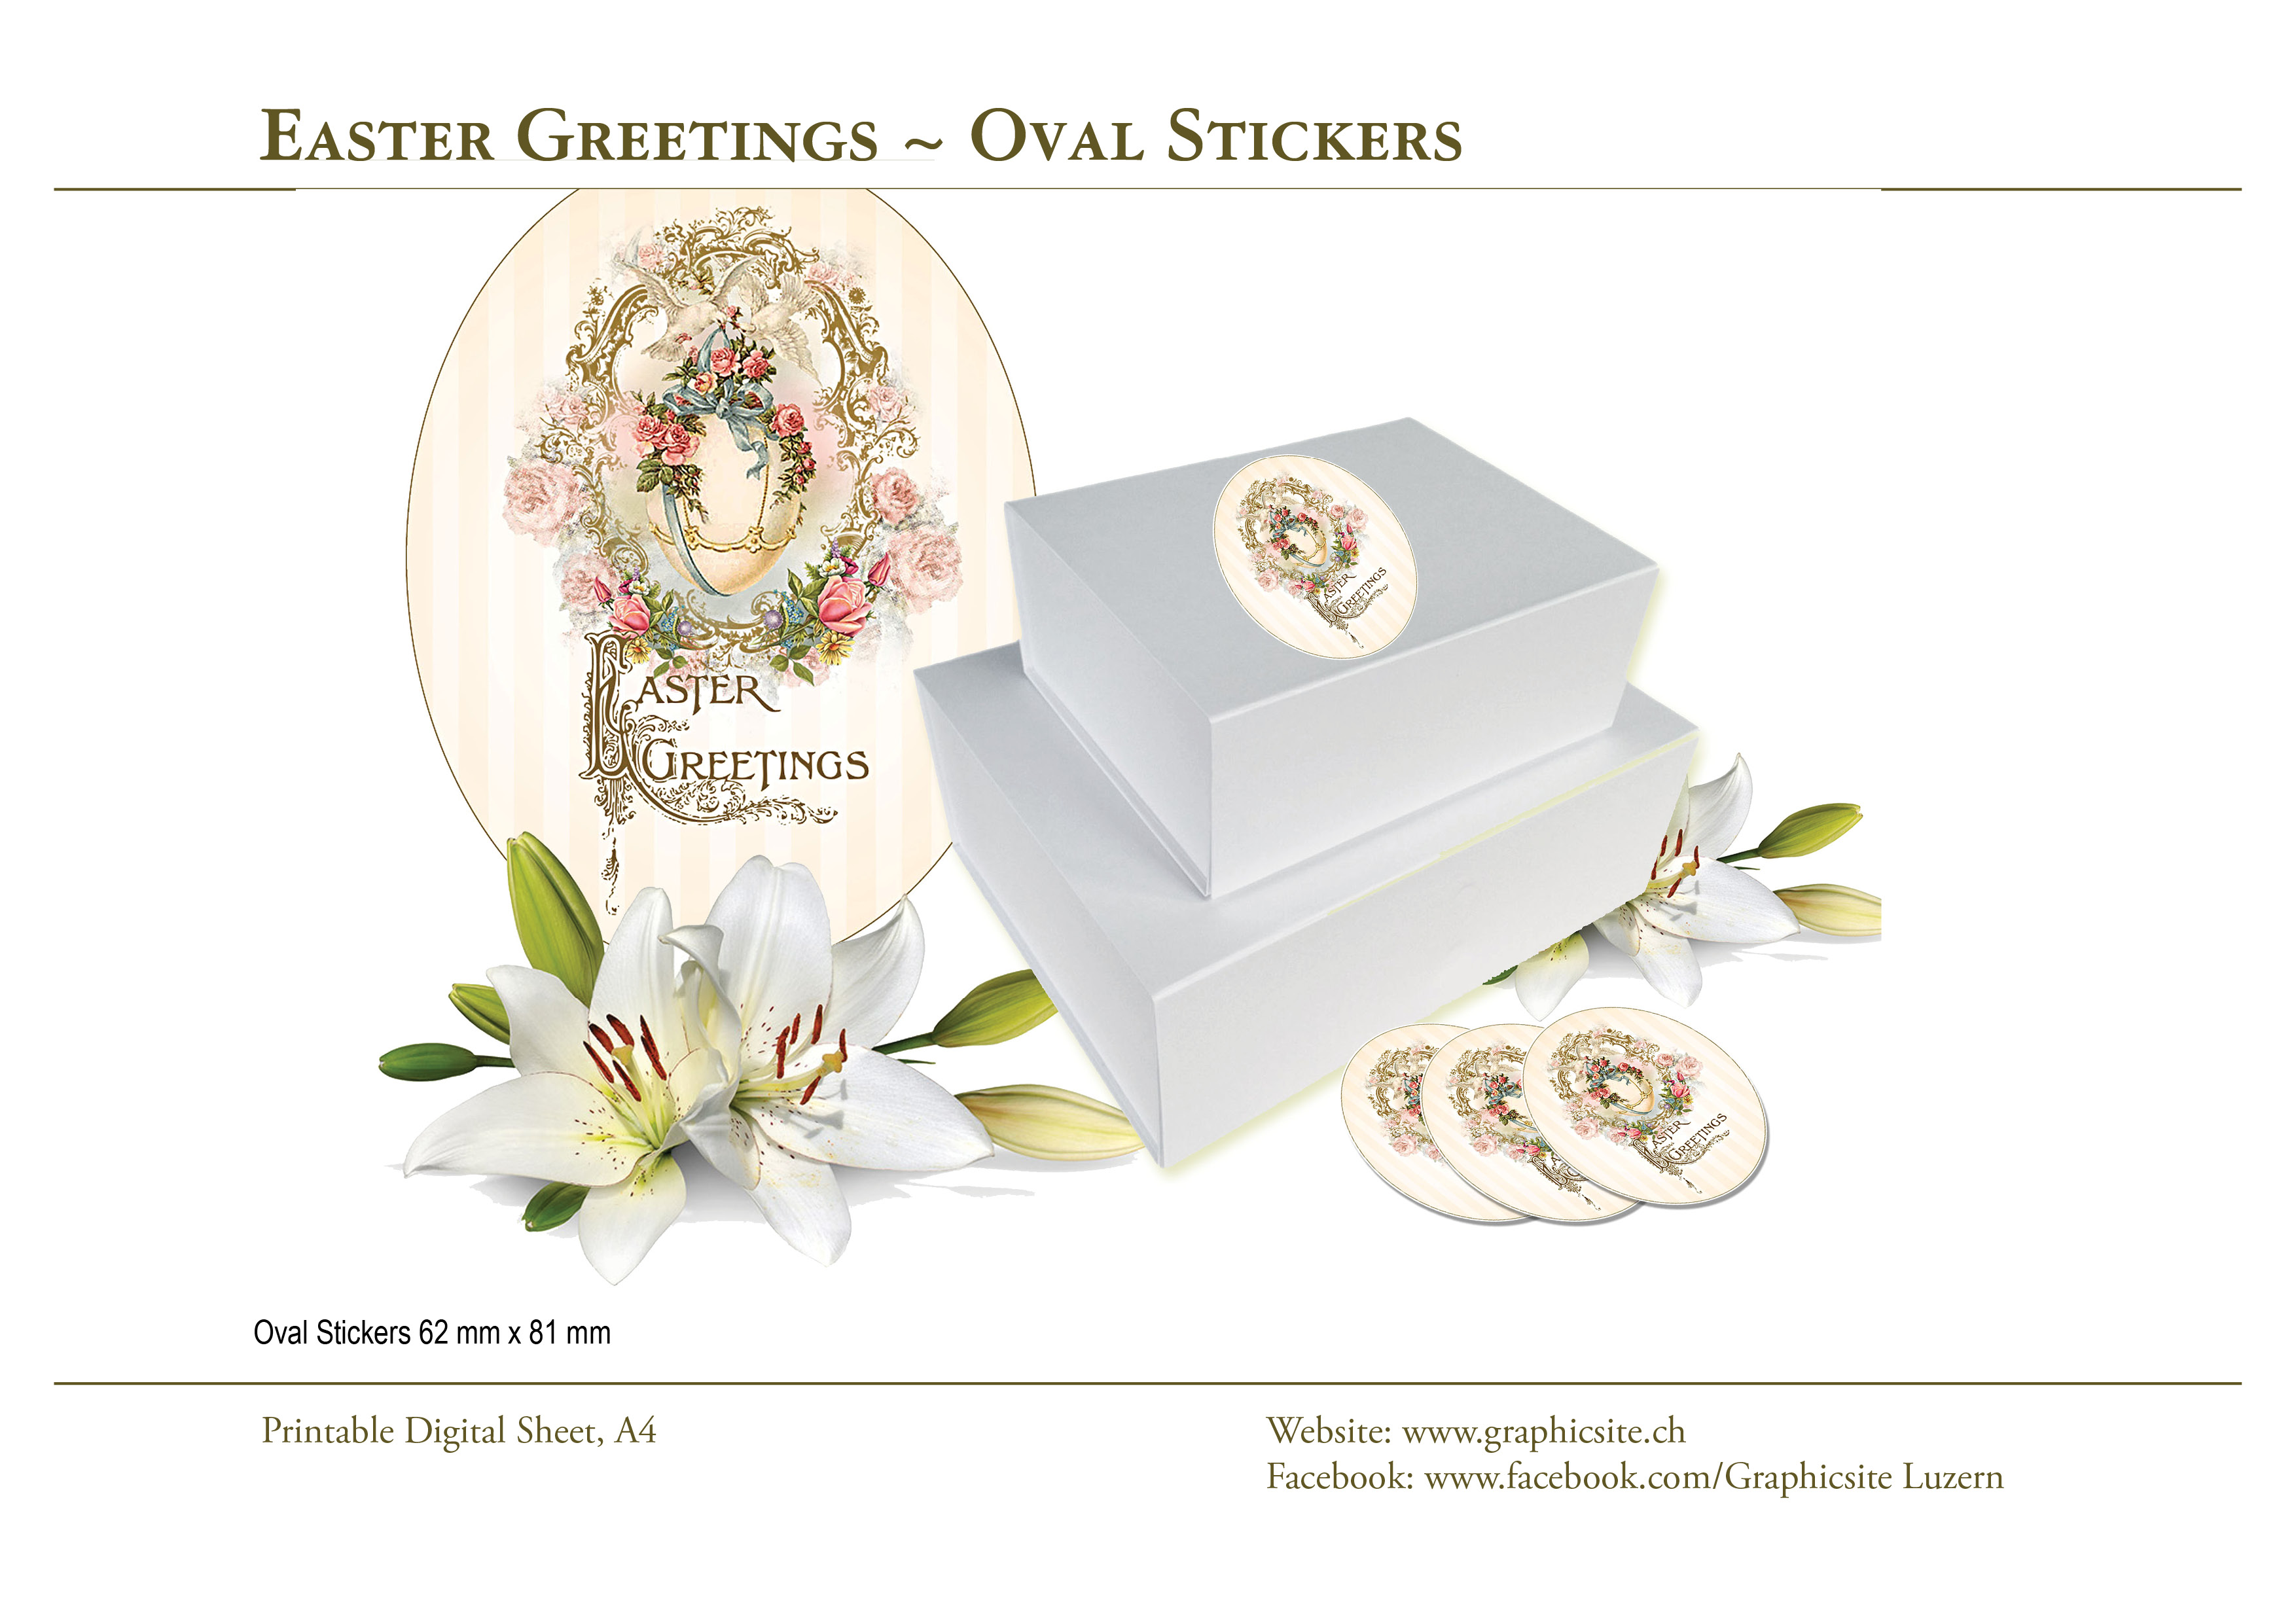 Printable Digital Sheets - Labels - Stickers - Easter Greetings - #easter, #labels, #gifts, #floral, #roses, #victorian, #vintage,